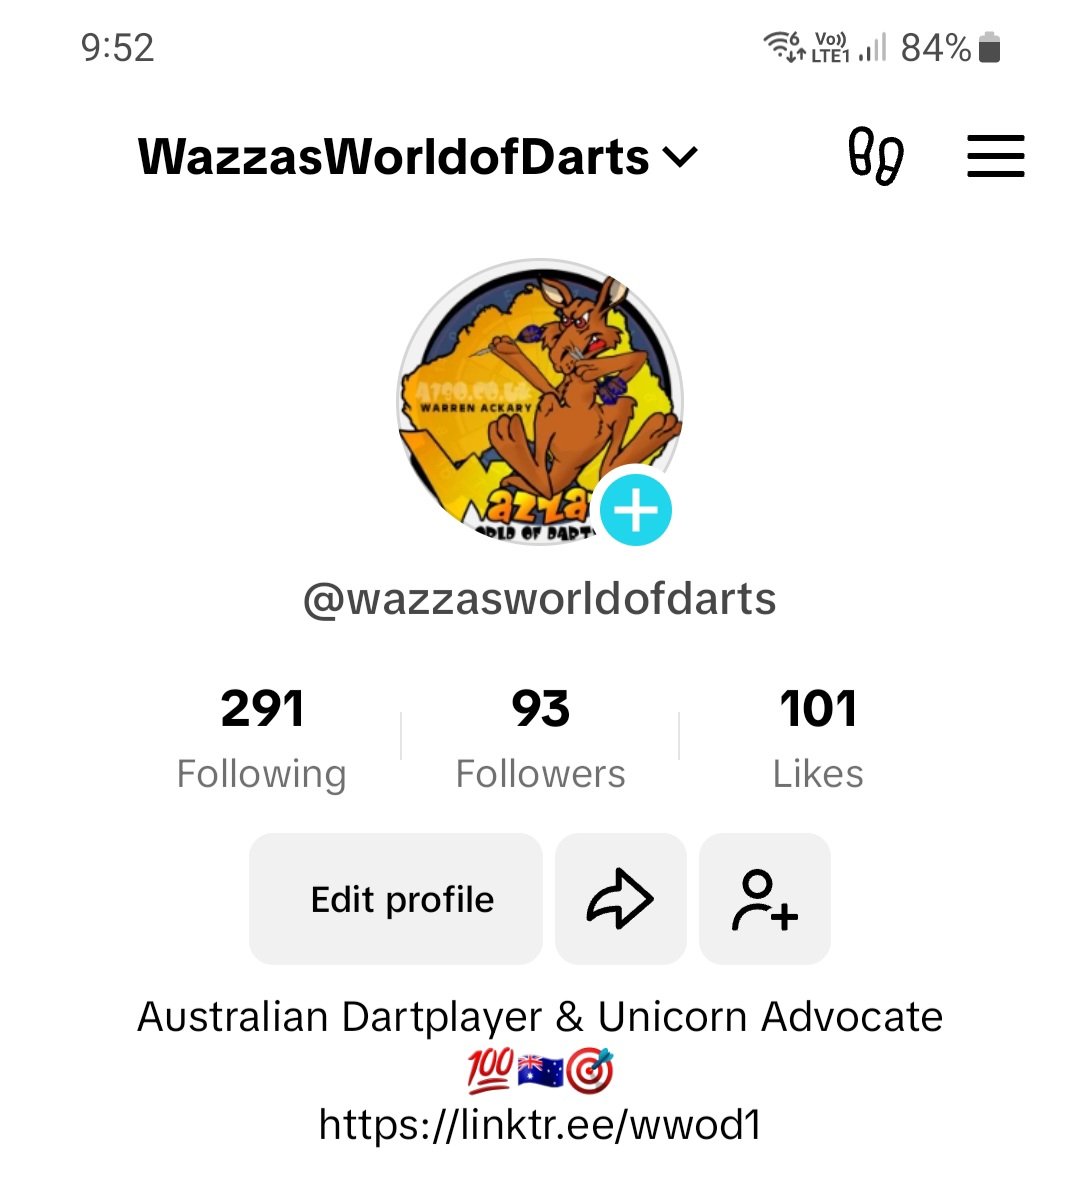 Aww come on guys! Where's the community spirit.. 1k followers and ill go live everyday @UnicornDarts
@anonymous_darts @180crabtree @DartsOrakel @MSSdarts  ring the bells call 1800000s get me to 1k followers before I turn 65! 💯🎯